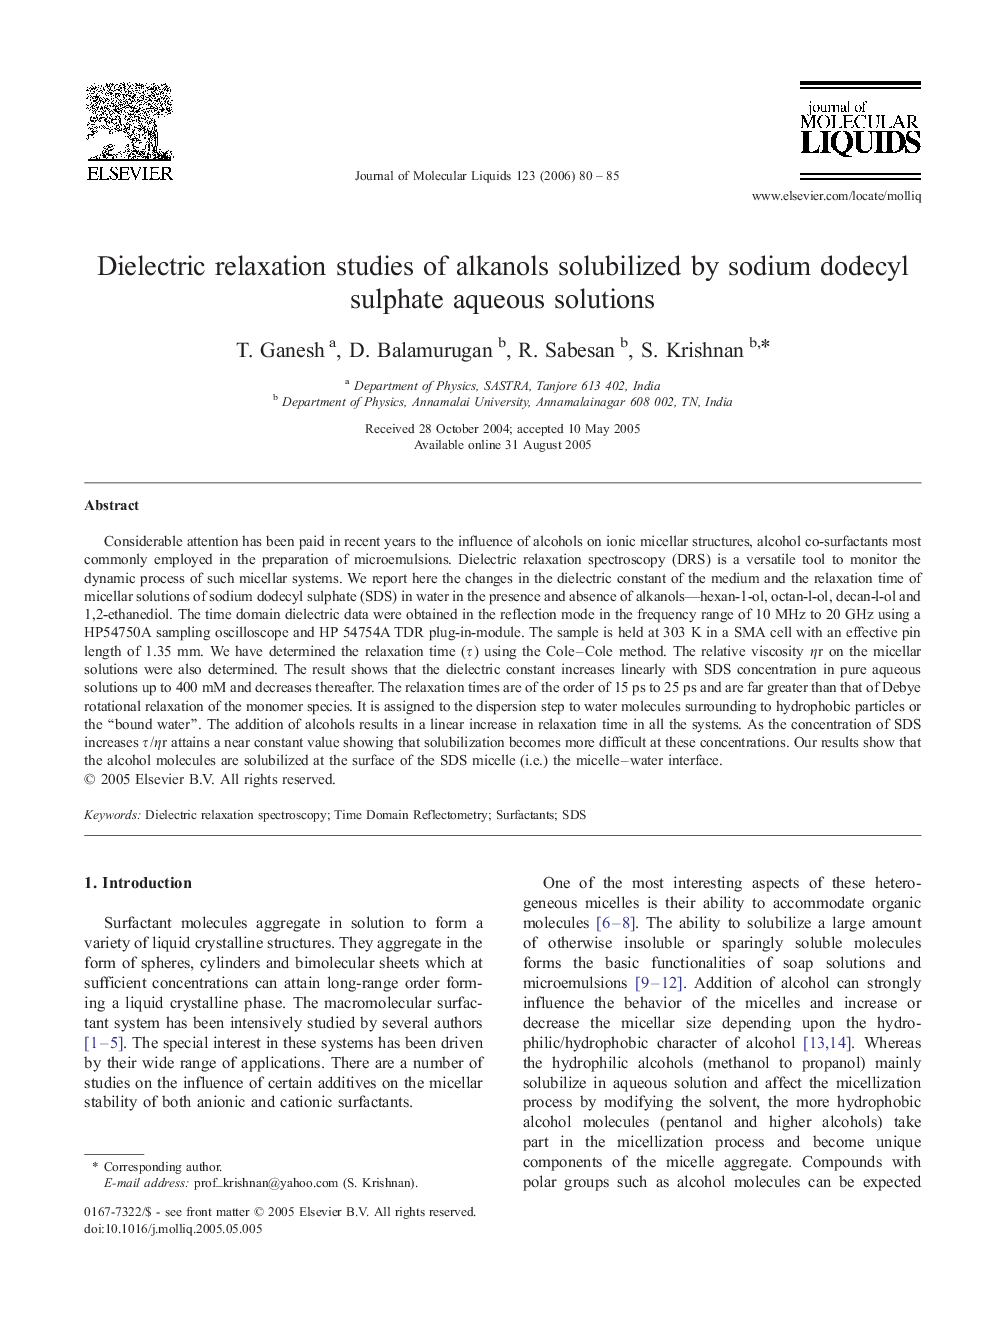 Dielectric relaxation studies of alkanols solubilized by sodium dodecyl sulphate aqueous solutions